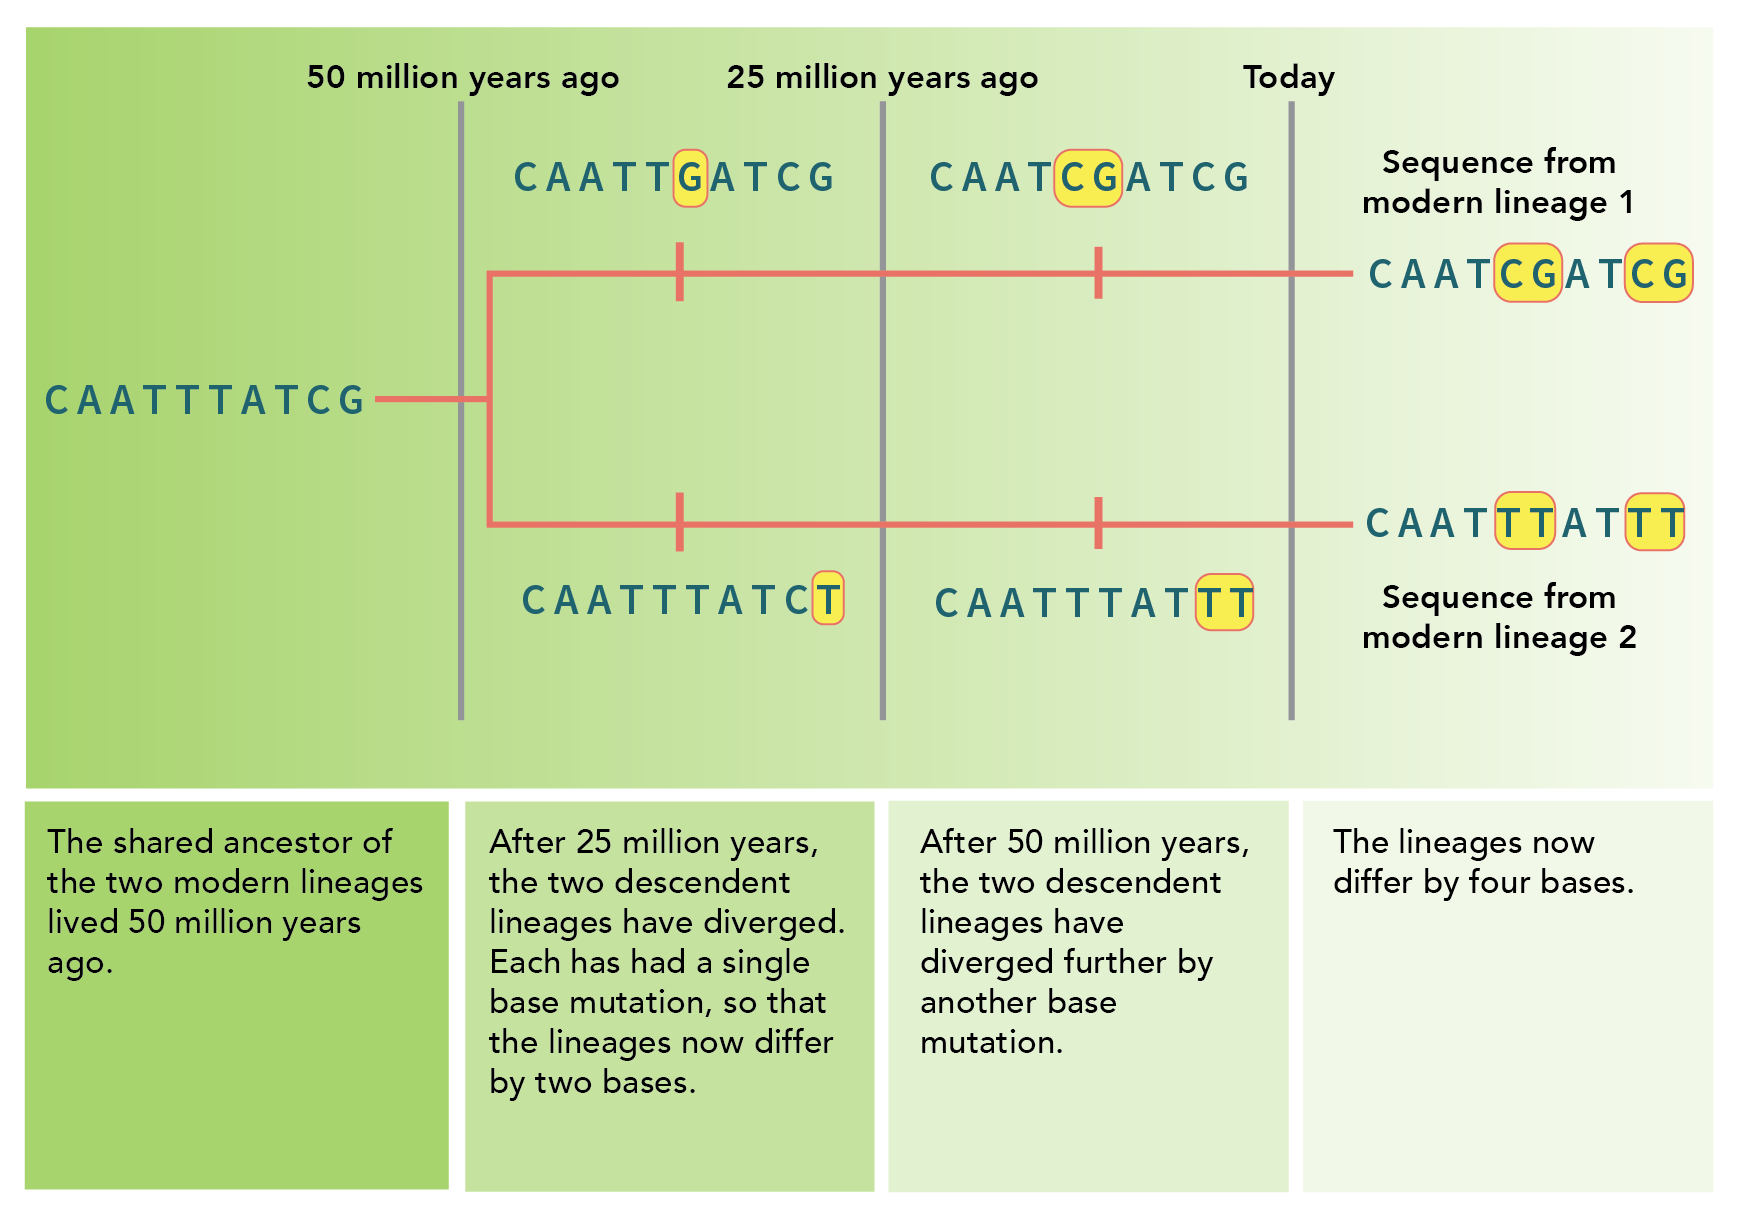 Shows a timeline along which a lineage diverges into two. A stretch of DNA sequence is shown for each time period. Each lineage accumulates on mutation per 25 million years. So after 50 million years, the sequences differ in 4 positions.